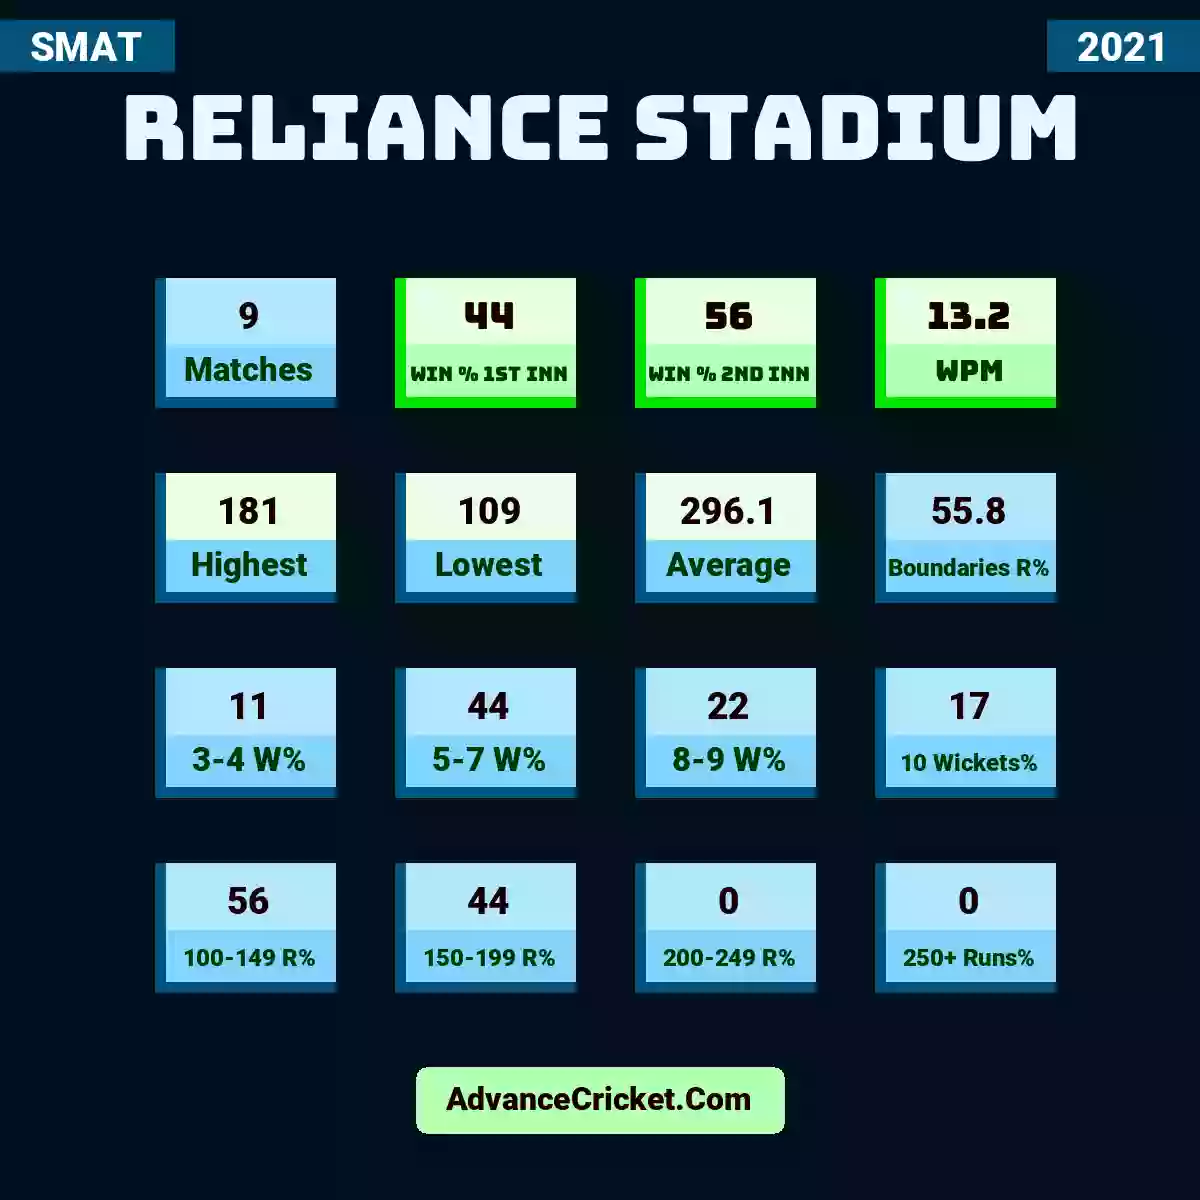 Image showing Reliance Stadium with Matches: 9, Win % 1st Inn: 44, Win % 2nd Inn: 56, WPM: 13.2, Highest: 181, Lowest: 109, Average: 296.1, Boundaries R%: 55.8, 3-4 W%: 11, 5-7 W%: 44, 8-9 W%: 22, 10 Wickets%: 17, 100-149 R%: 56, 150-199 R%: 44, 200-249 R%: 0, 250+ Runs%: 0.